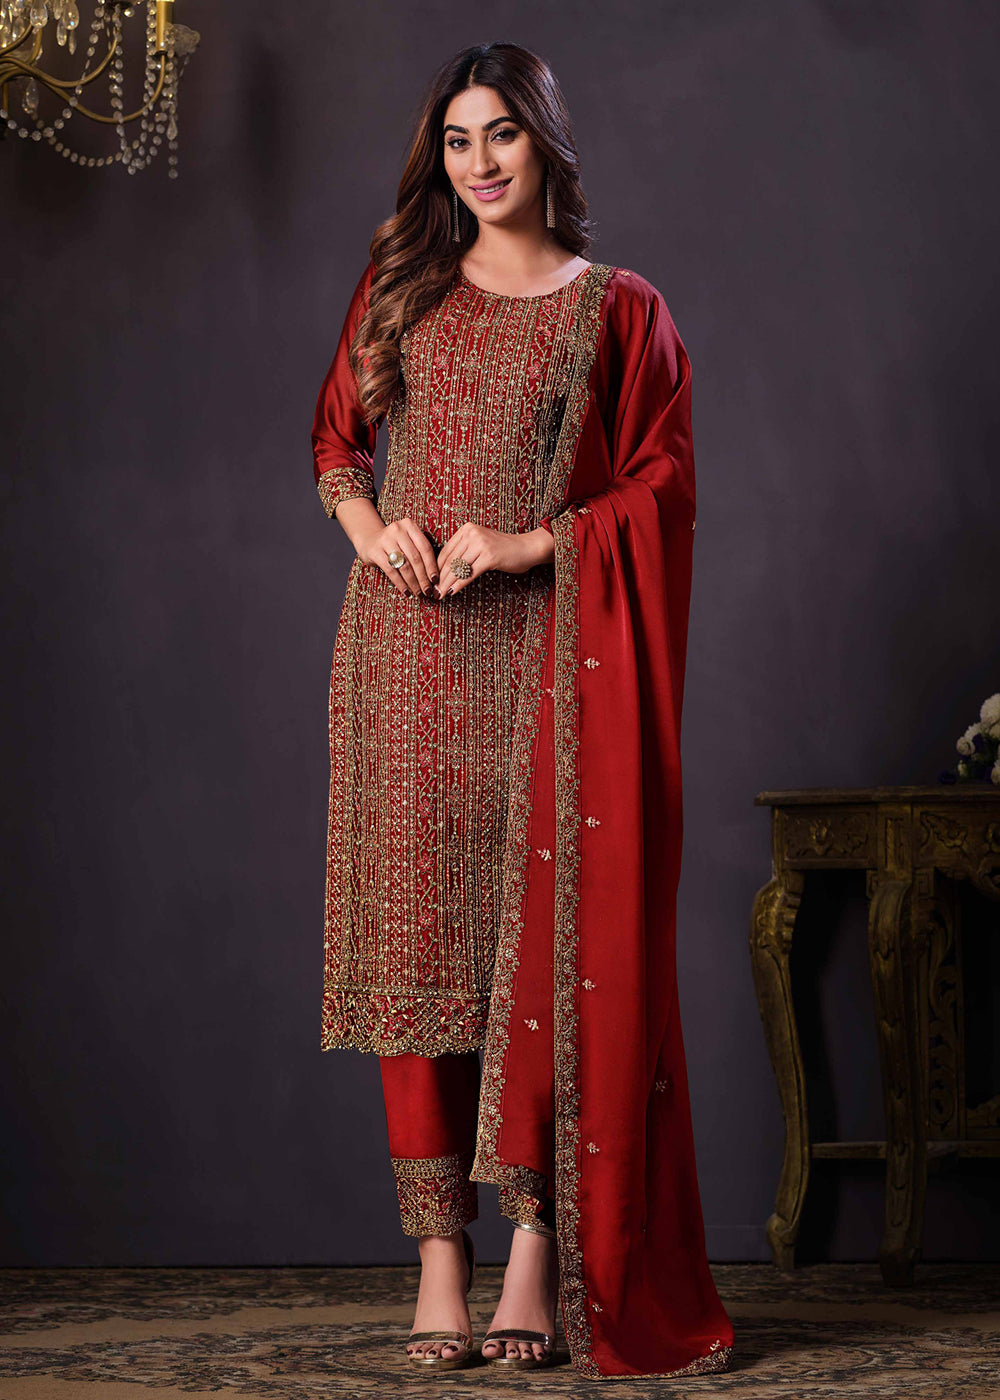 Buy Now Two Tone Cottonic Georgette Red Function Style Salwar Suit Online in USA, UK, Canada, Germany, Australia & Worldwide at Empress Clothing. 